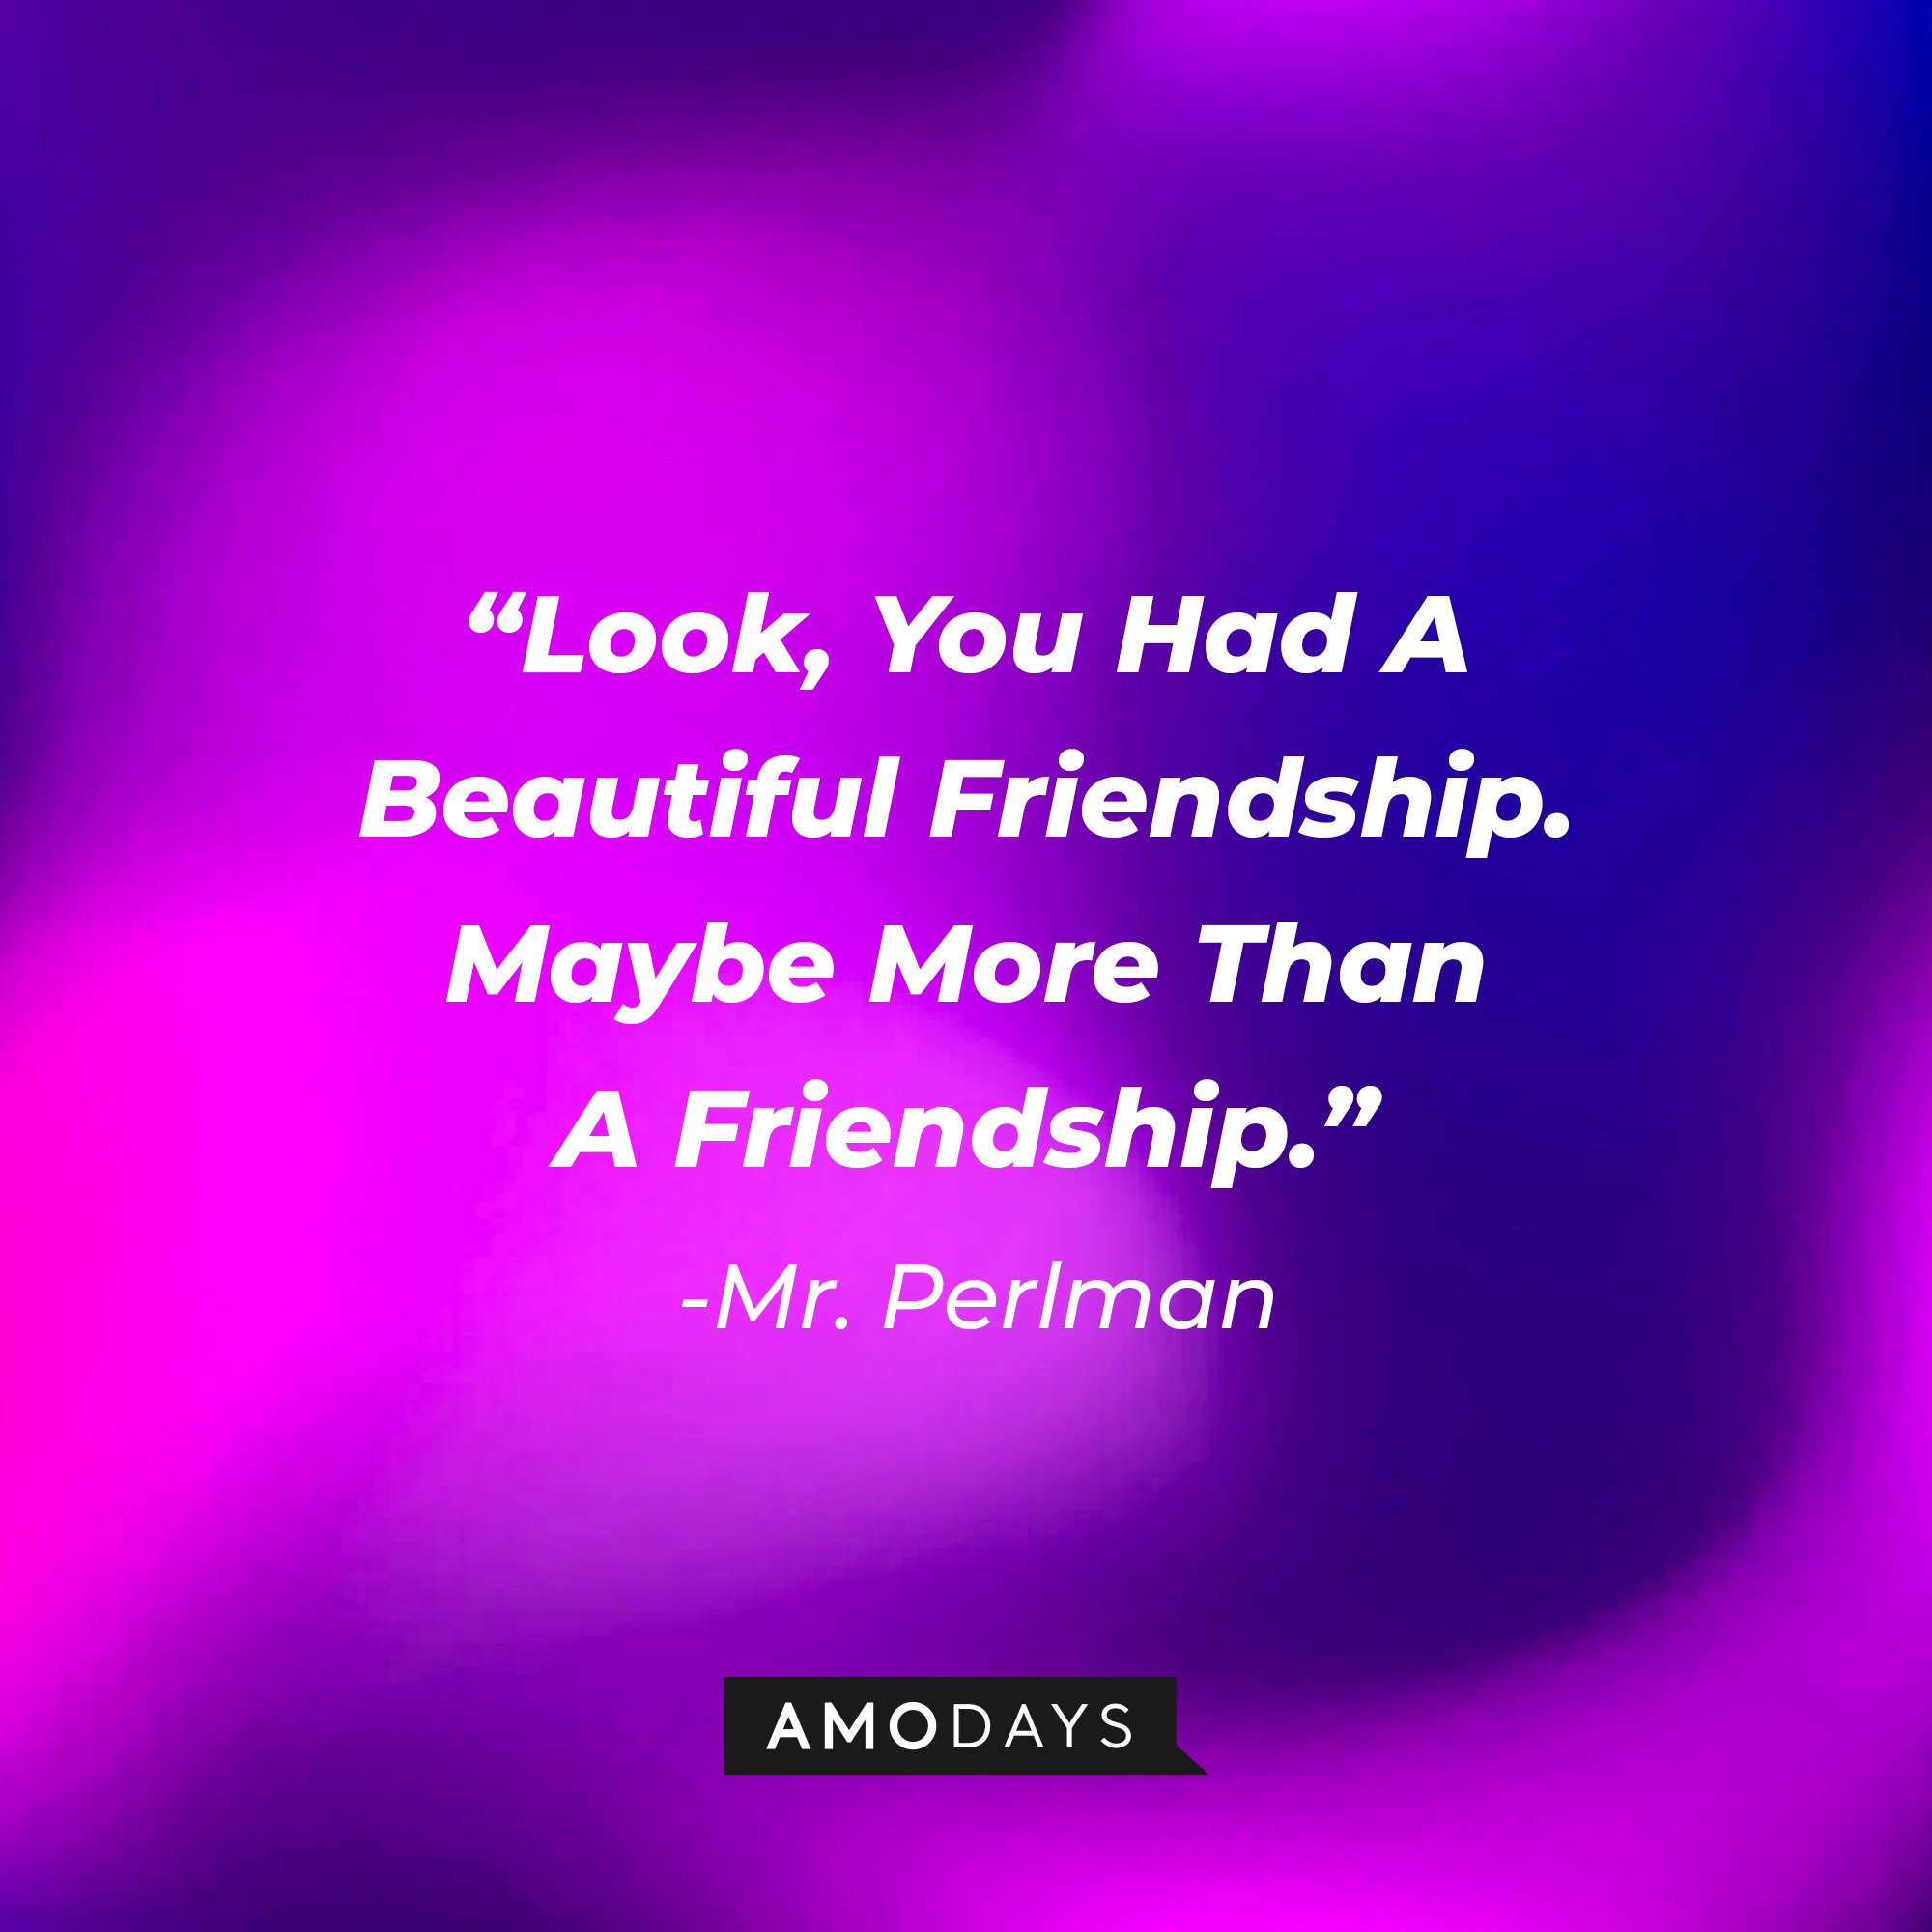 Mr. Perlman's quote: "Look, You Had A Beautiful Friendship. Maybe More Than A Friendship." | Source: AmoDays